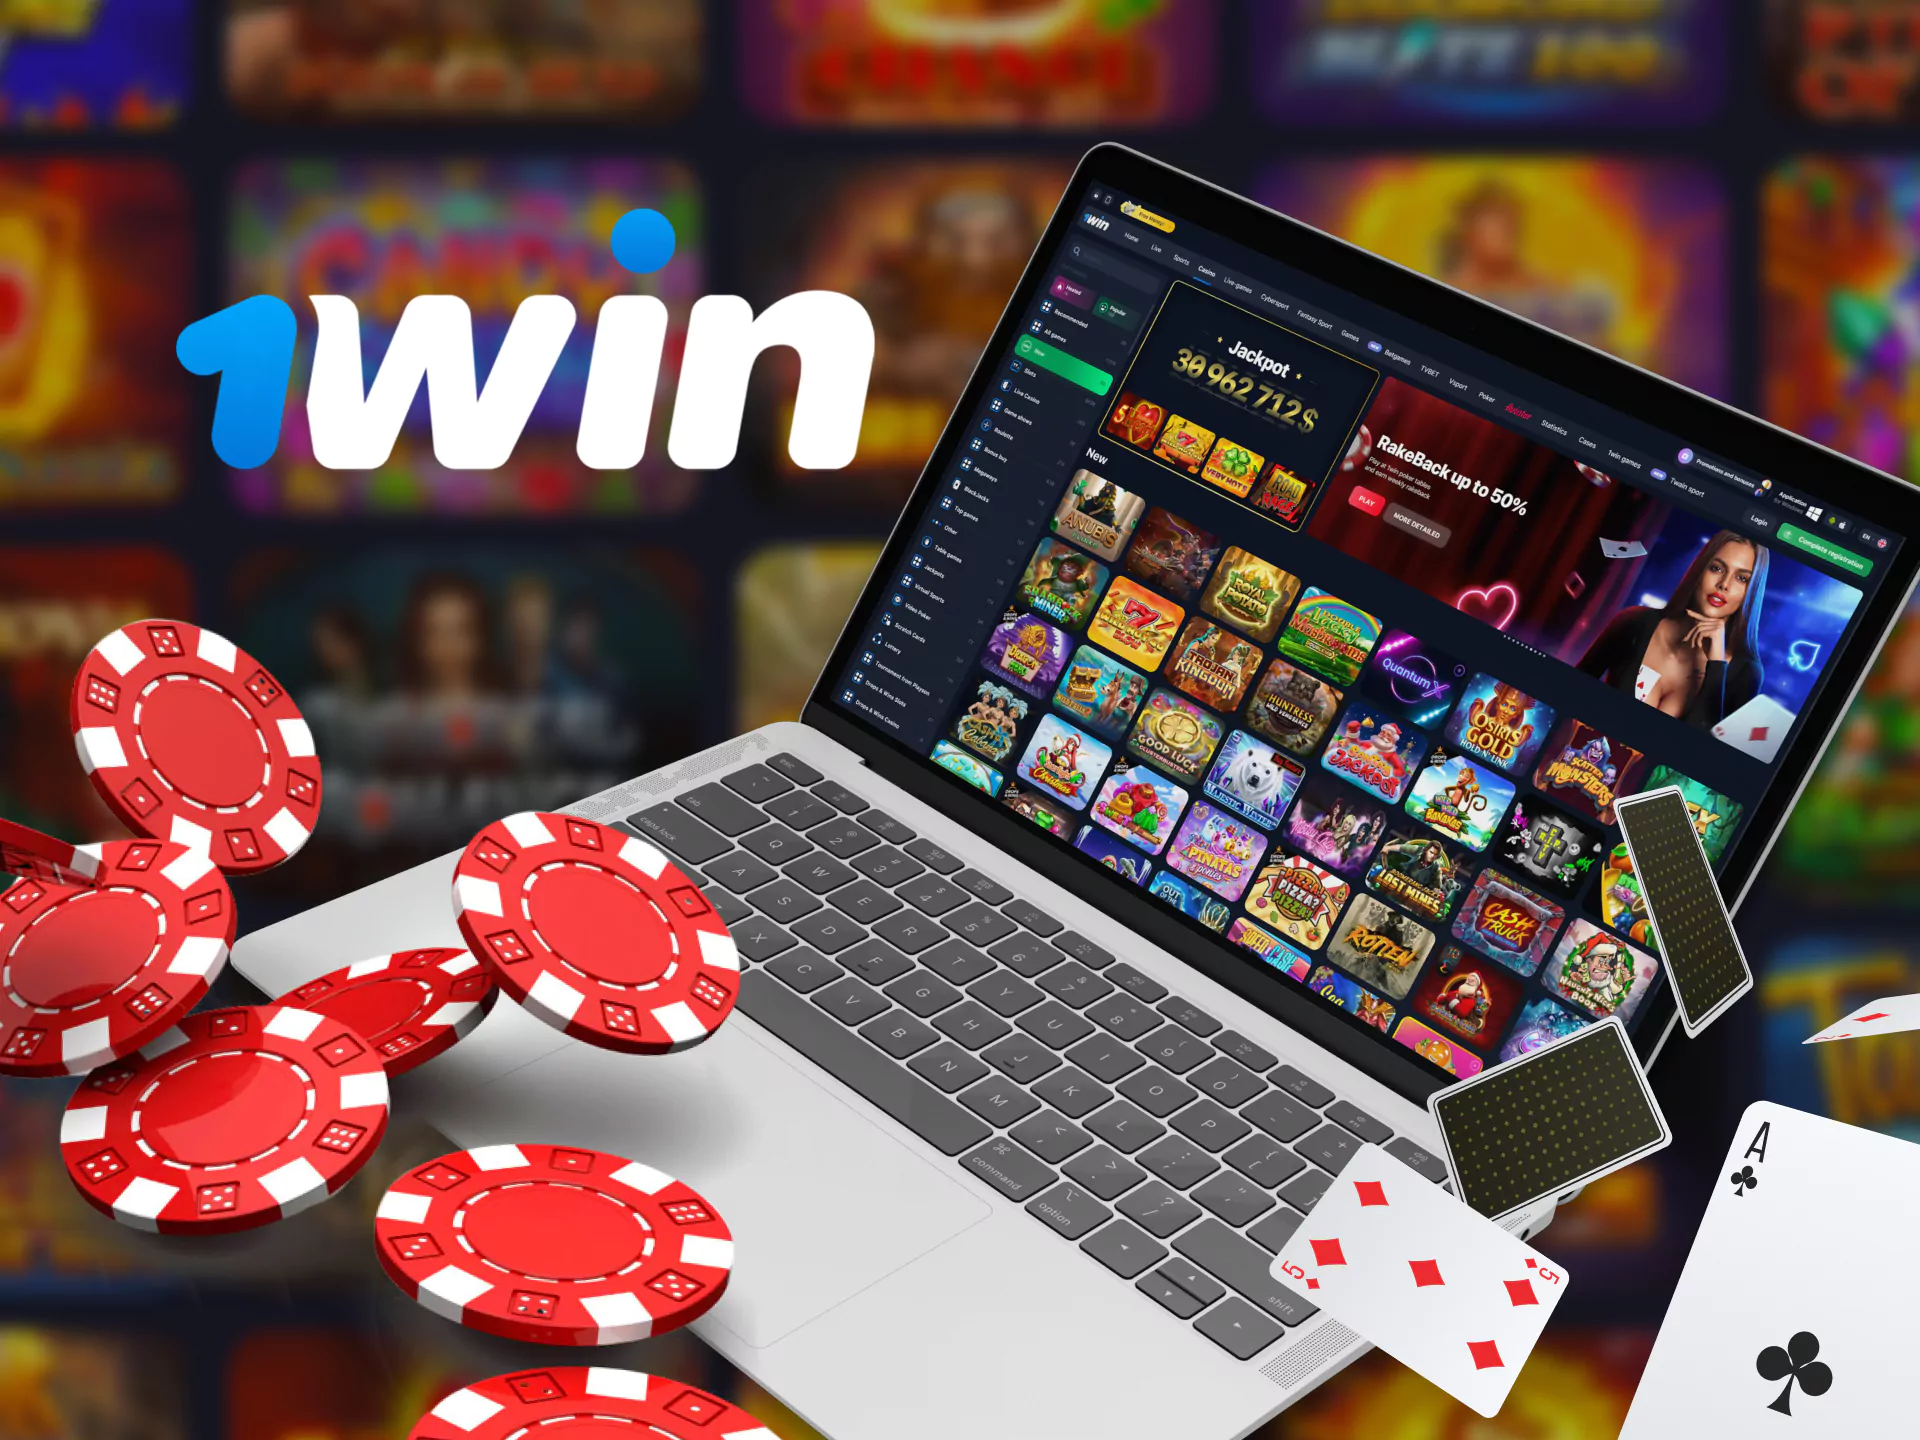 Live Casino 1Win has many advantages for players.